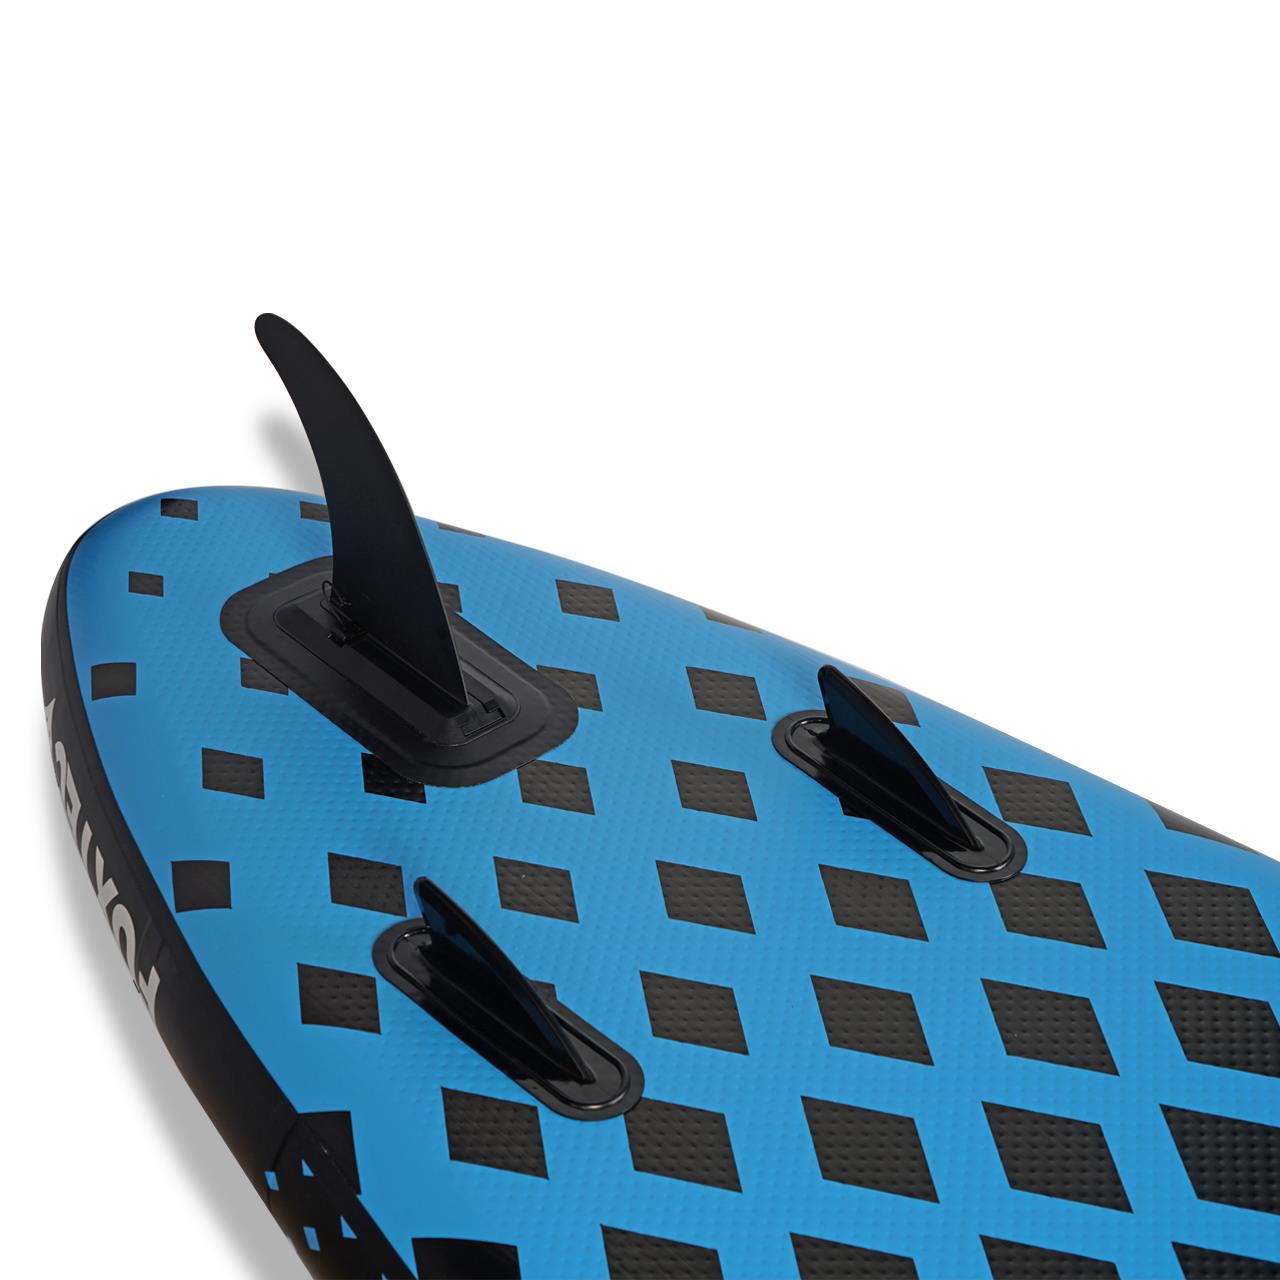 FUXTEC Stand Up Paddle Board FX-SUP320eco